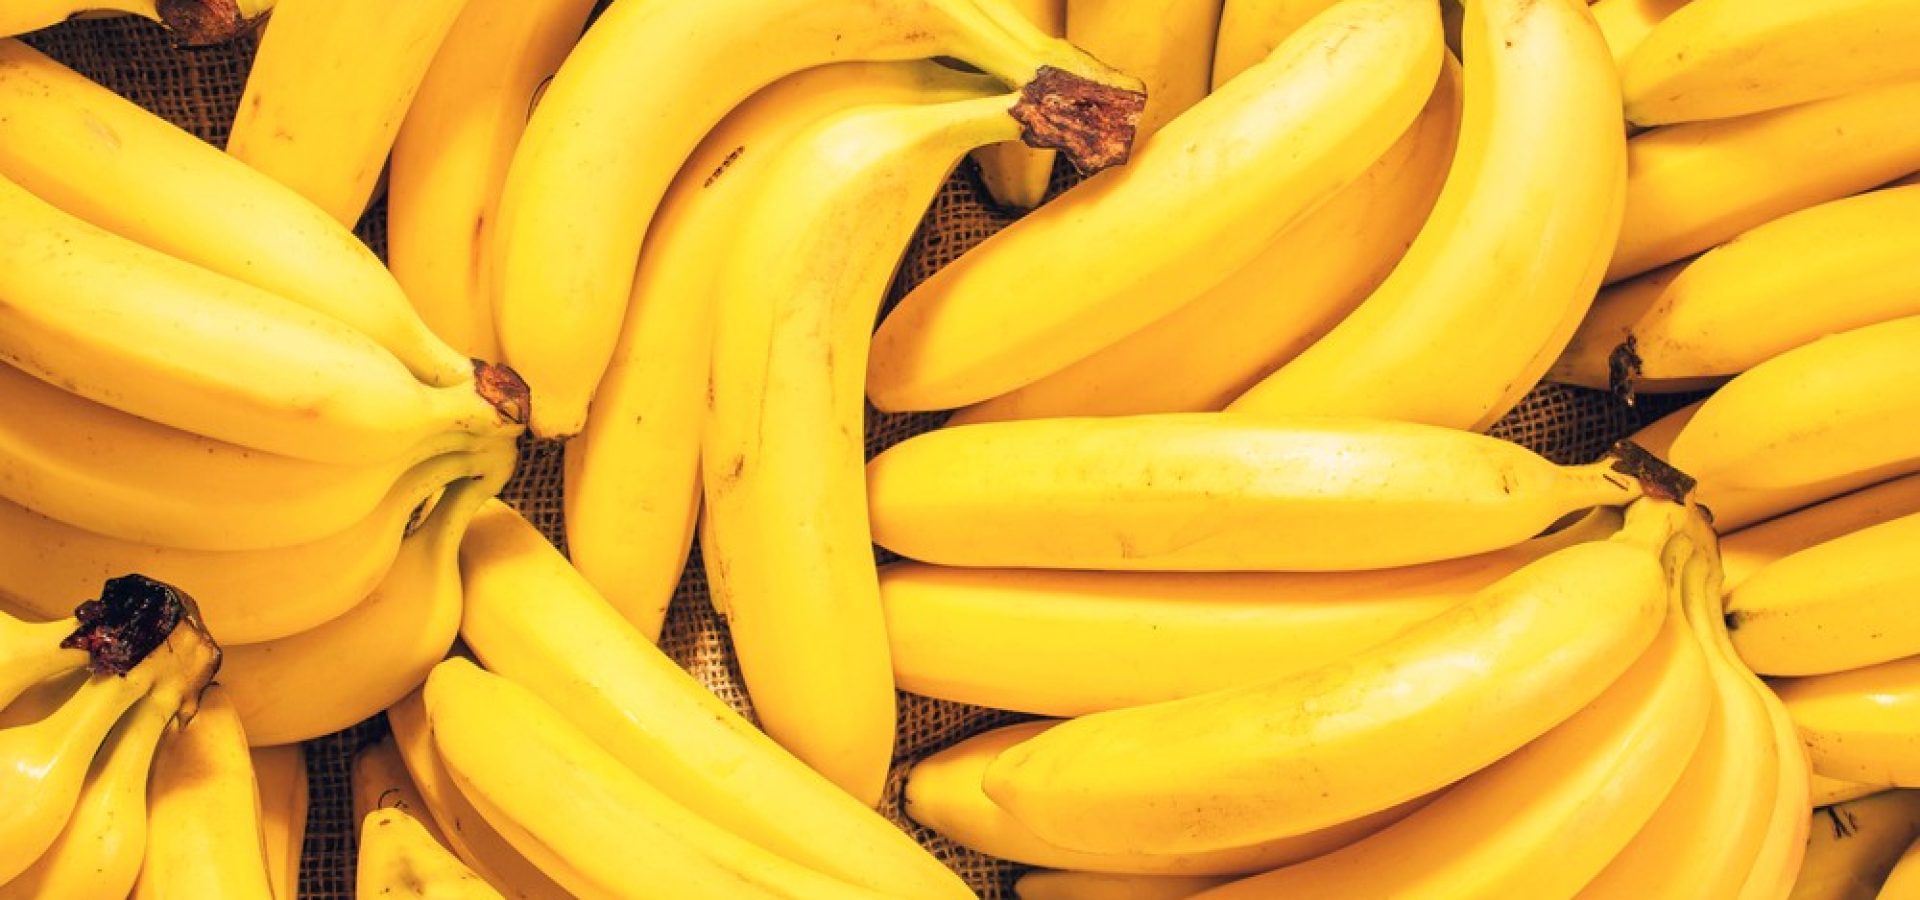 Coronavirus is likely to hit the supplies of bananas in Asia